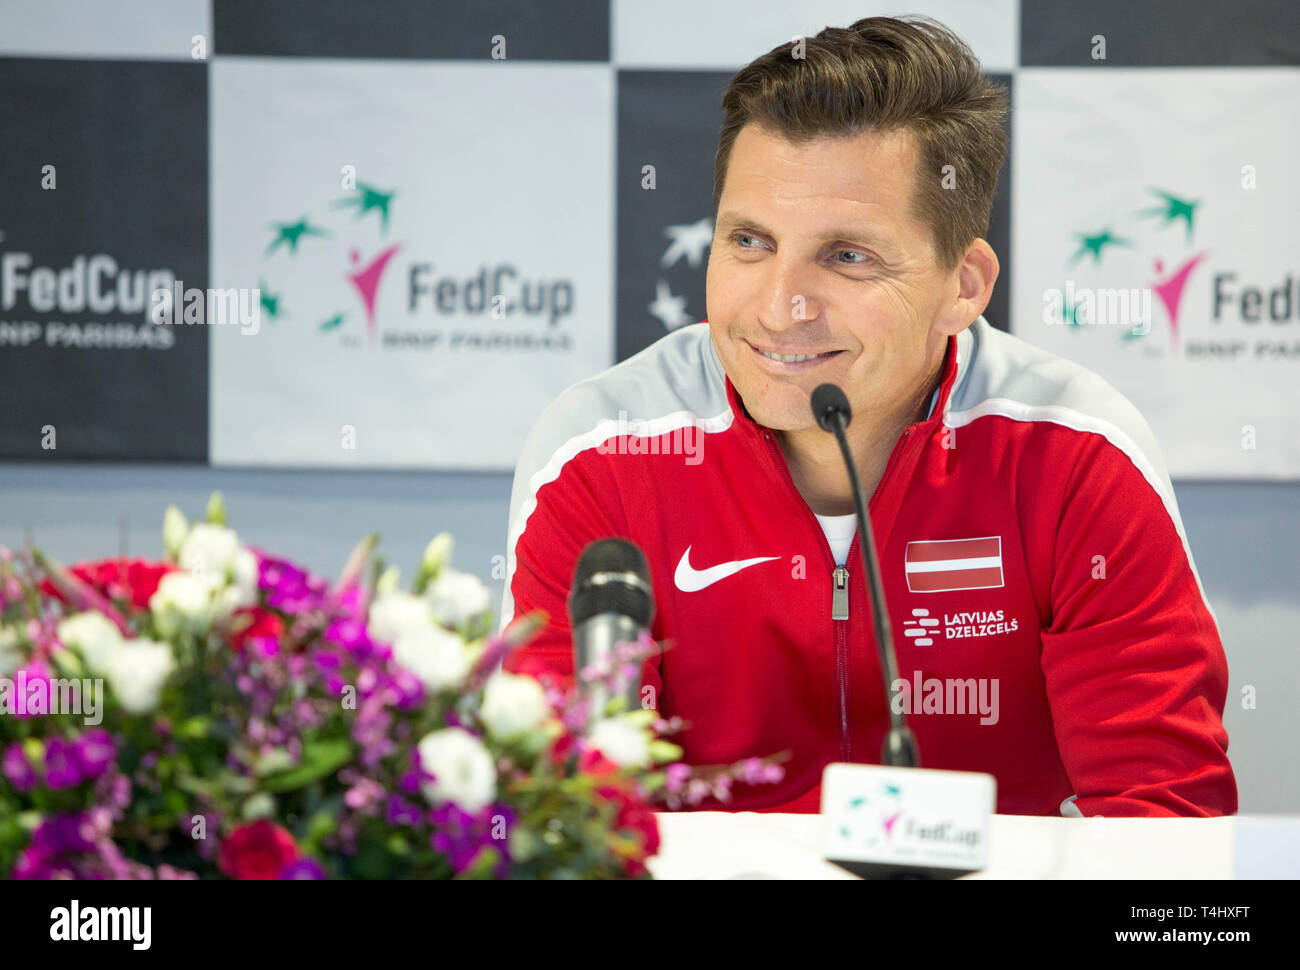 Riga, Latvia. 16th Apr, 2019. Adrians Zguns, captain of Team Latvia to the Feb Cup tennis tournament, reacts during a press conference prior to the Fed Cup in Riga, Latvia, April 16, 2019. Credit: Edijs Palens/Xinhua/Alamy Live News Stock Photo